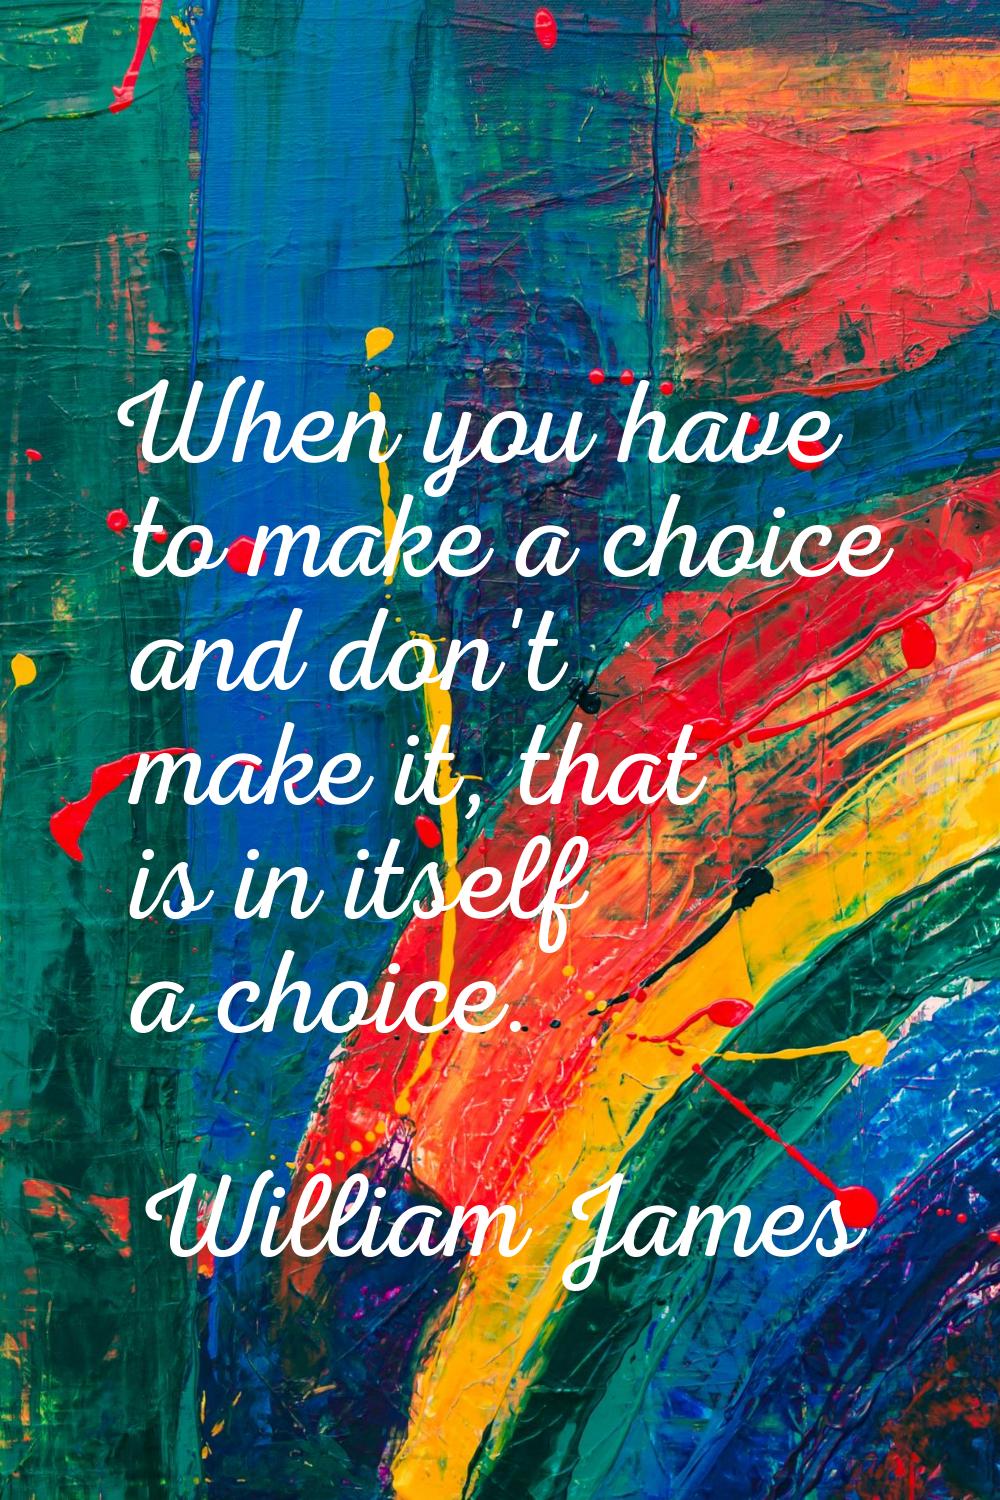 When you have to make a choice and don't make it, that is in itself a choice.